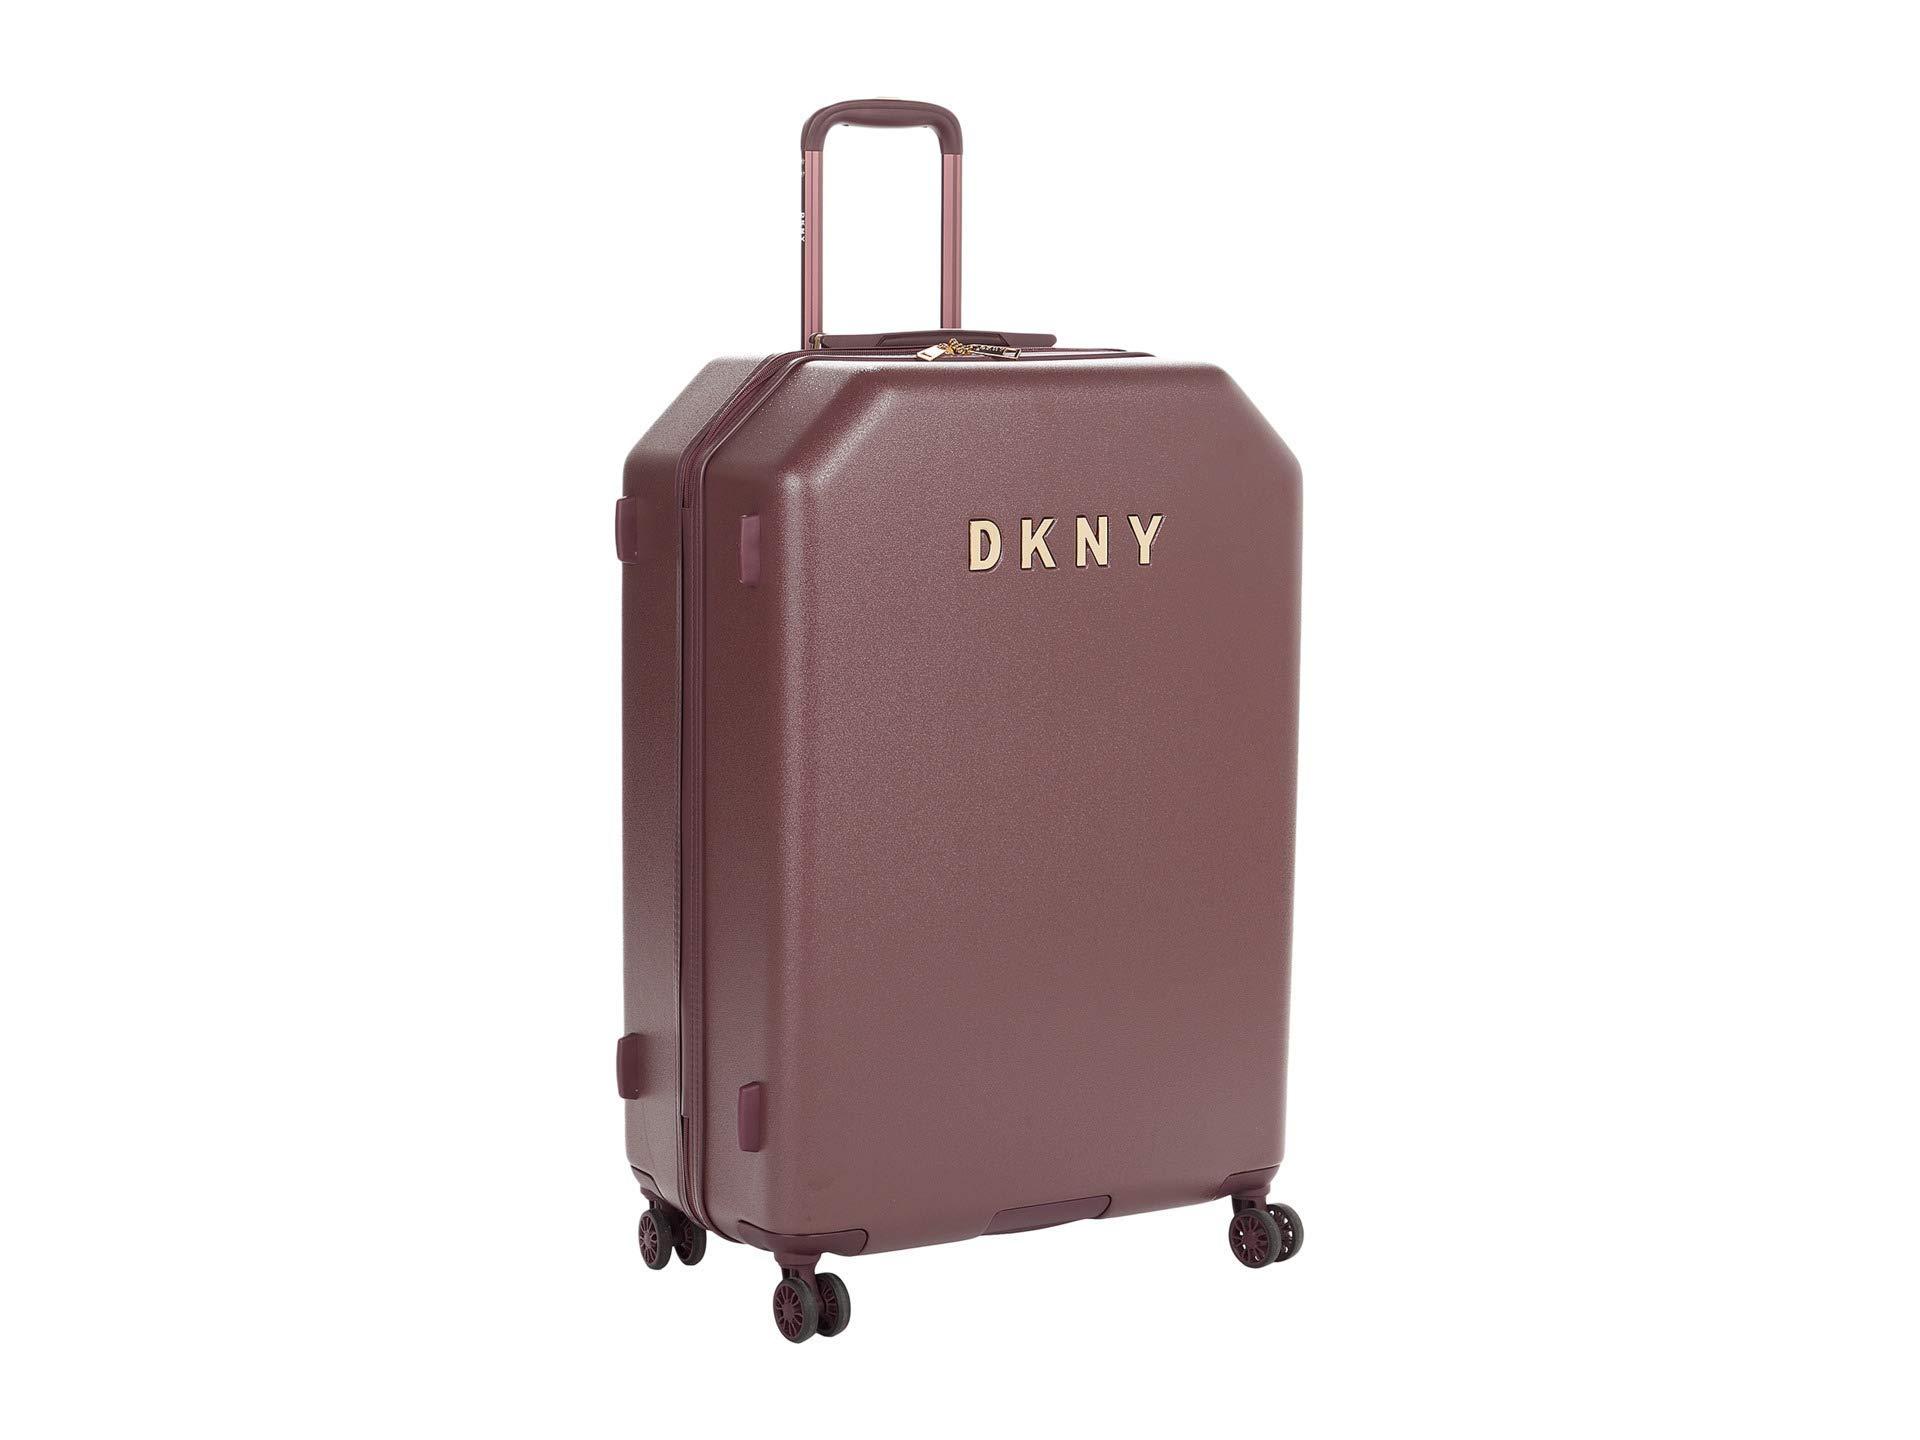 Dkny Allure 28 Check-in, Created for Macy's - Burgundy